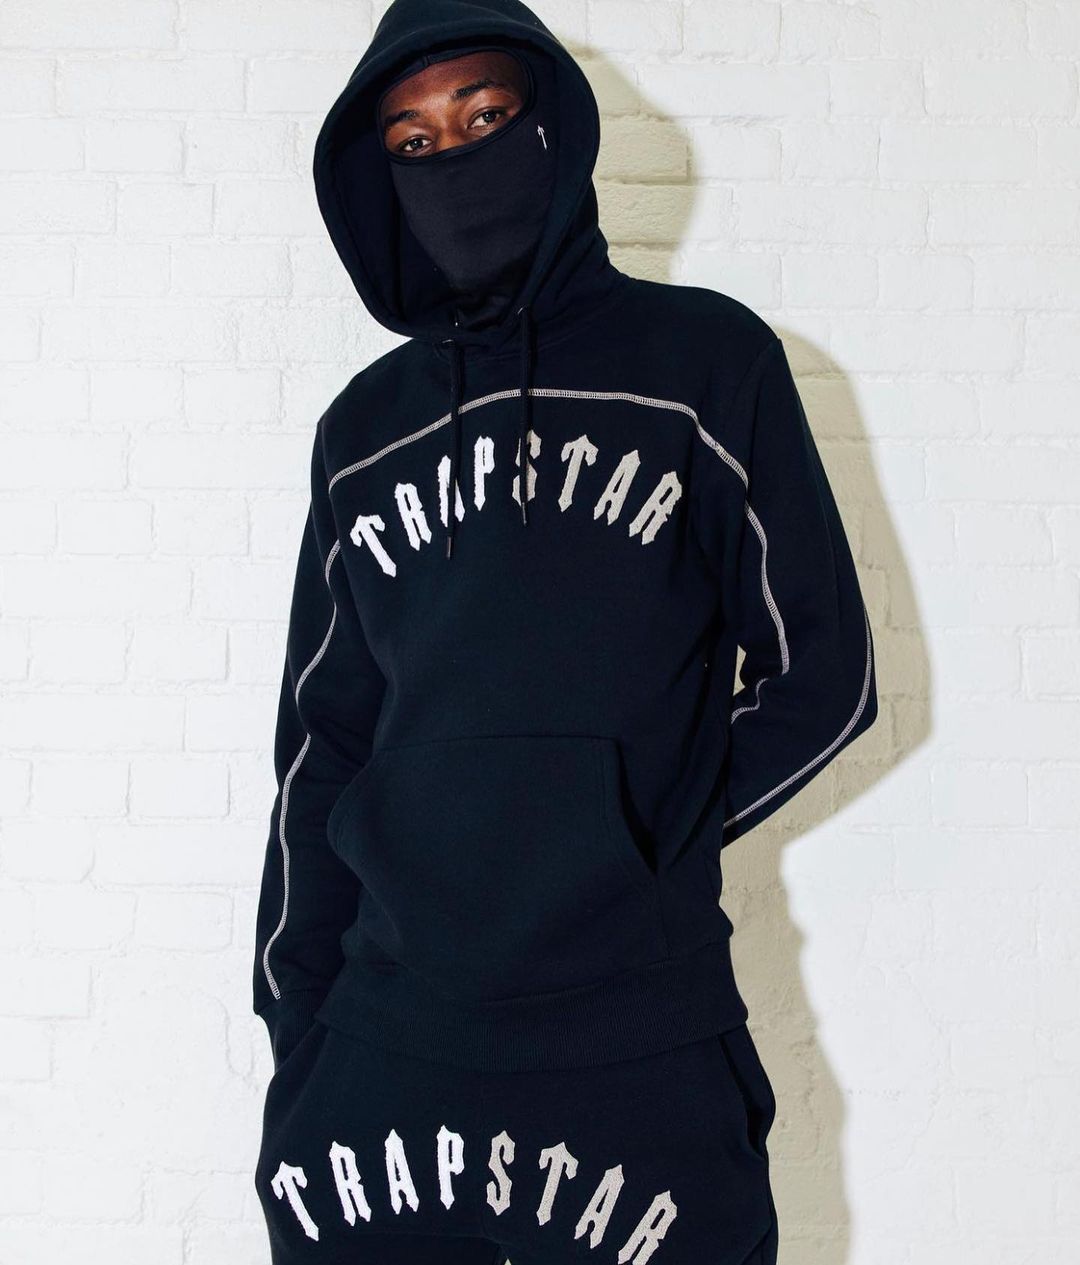 TRAPSTAR IRONGATE ARCH CHENILLE HOODED TRACKSUIT - BLACK MONOCHROME EDITION